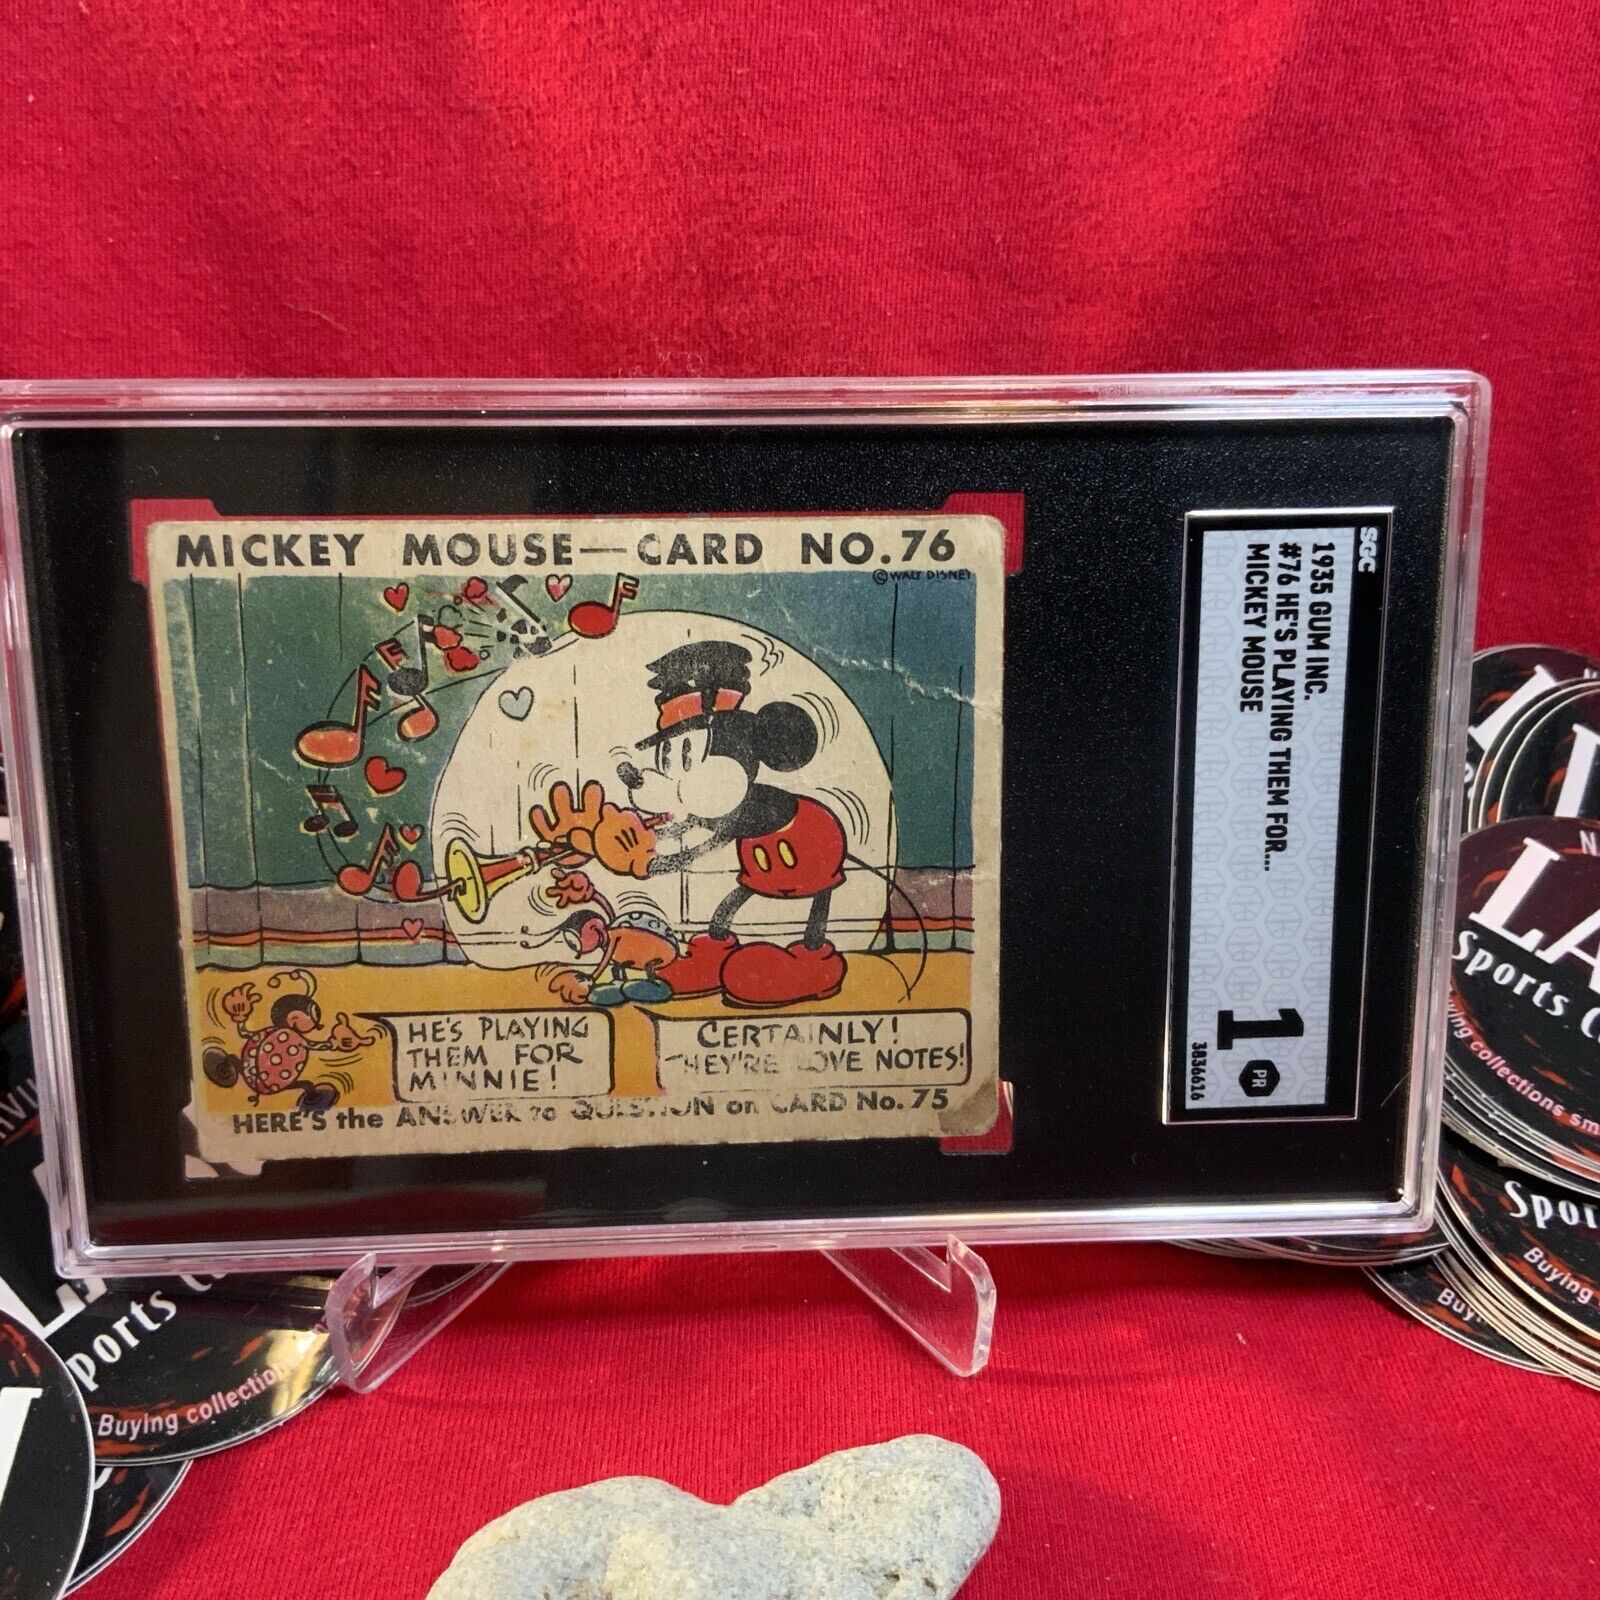 1935 MICKEY MOUSE GUM CARD,  #76 Hes Playing Them For , SGC 1 NICE EYE APPEAL.